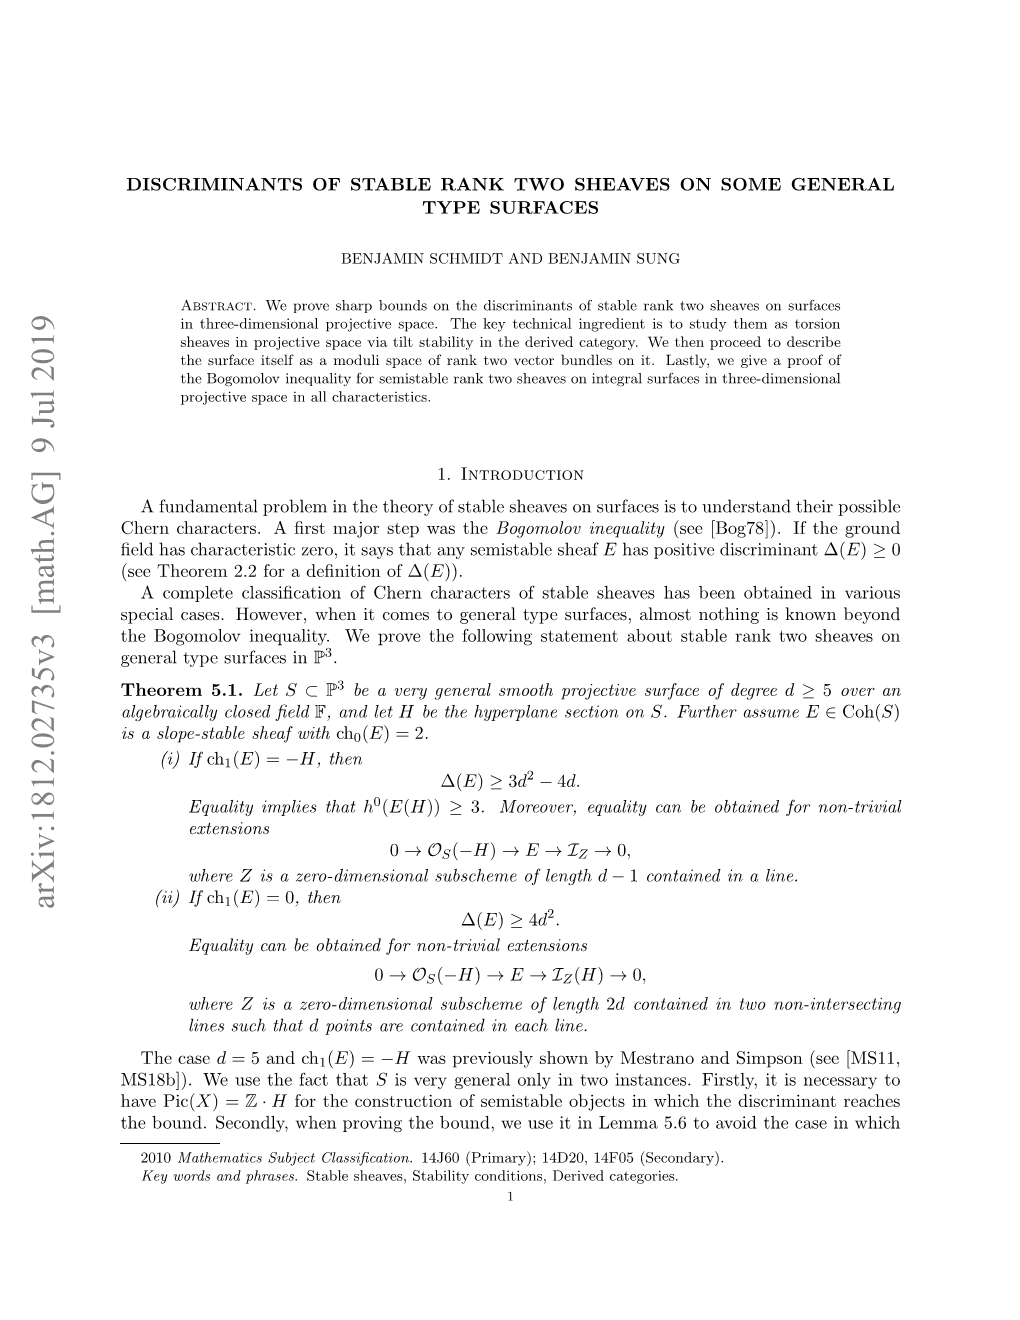 Discriminants of Stable Rank Two Sheaves on Some General Type